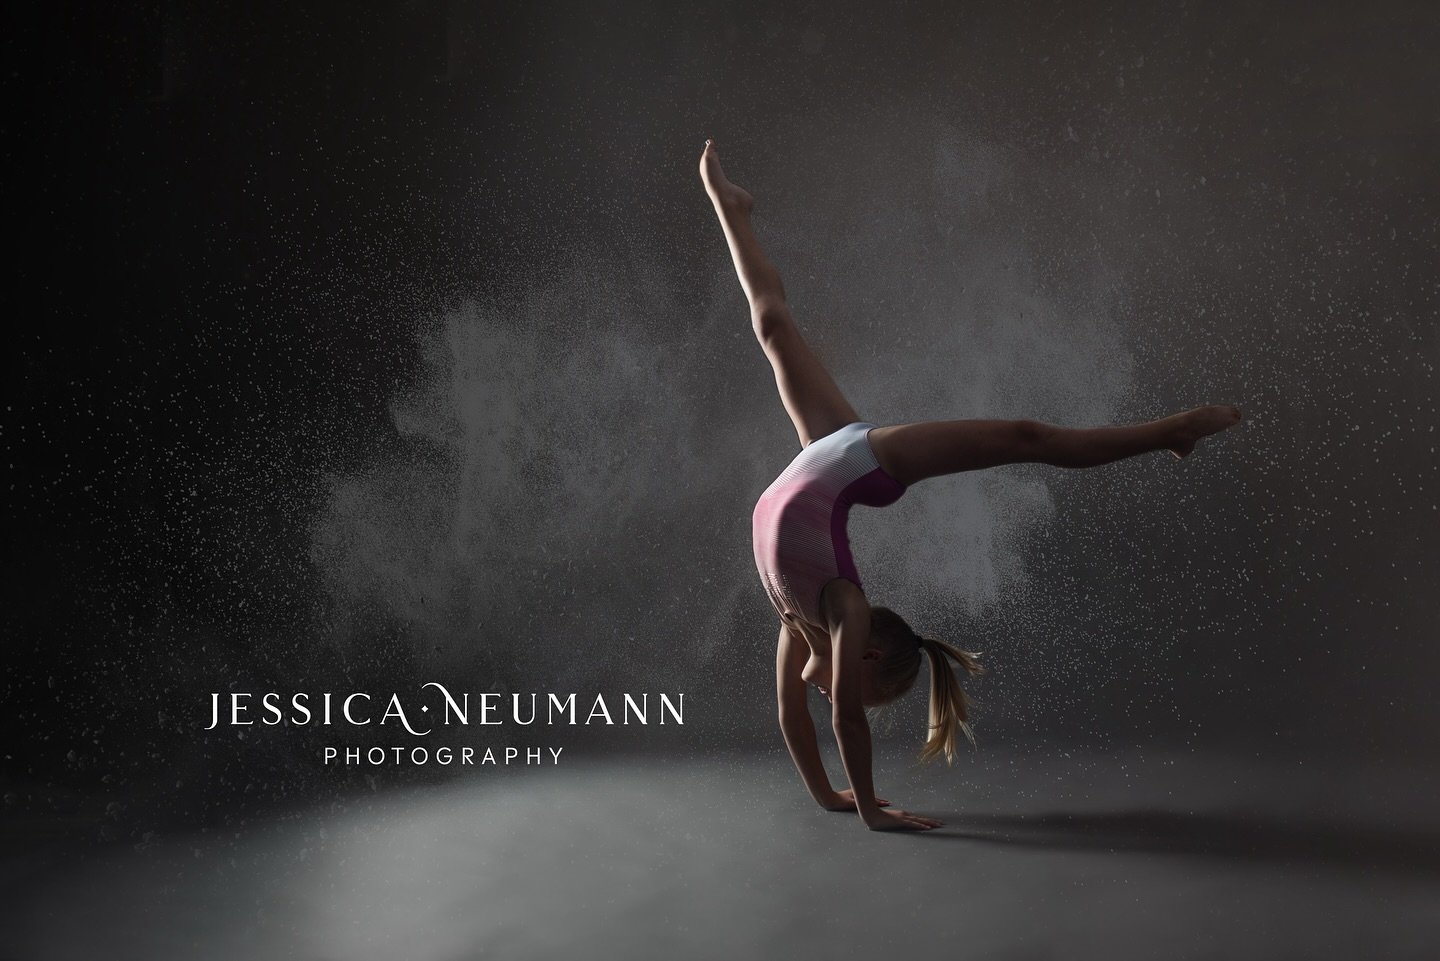 If you&rsquo;ve been to the studio, you&rsquo;ve definitely seen this image proudly displayed. 🤍 

If you&rsquo;re interested in booking a session, head to my website for more examples of my work, and booking info: https://www.jessicaneumannphotogra